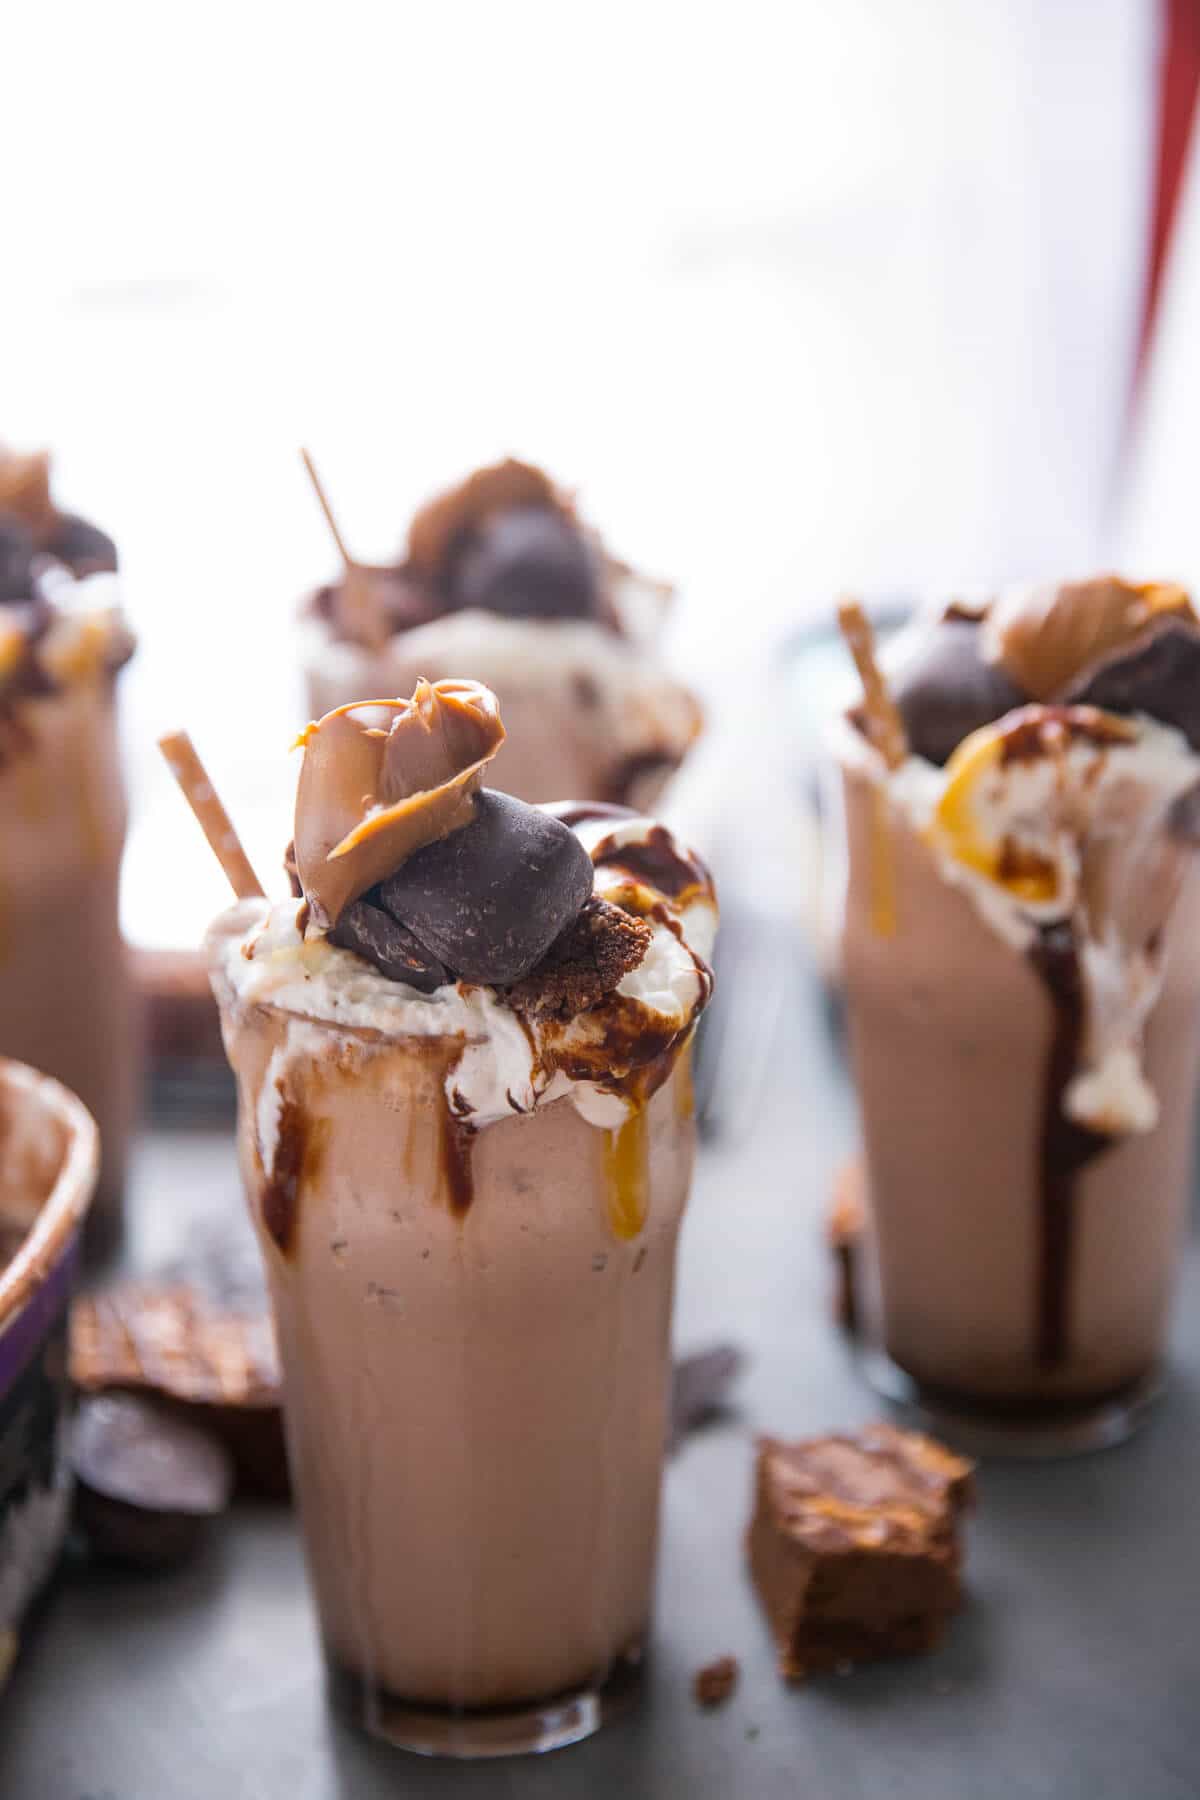 This salted caramel milkshake is for extreme salted caramel lovers! Brownies, candies, salted caramel sauce, and two kinds of ice creams make this one memorable and extreme milkshake!